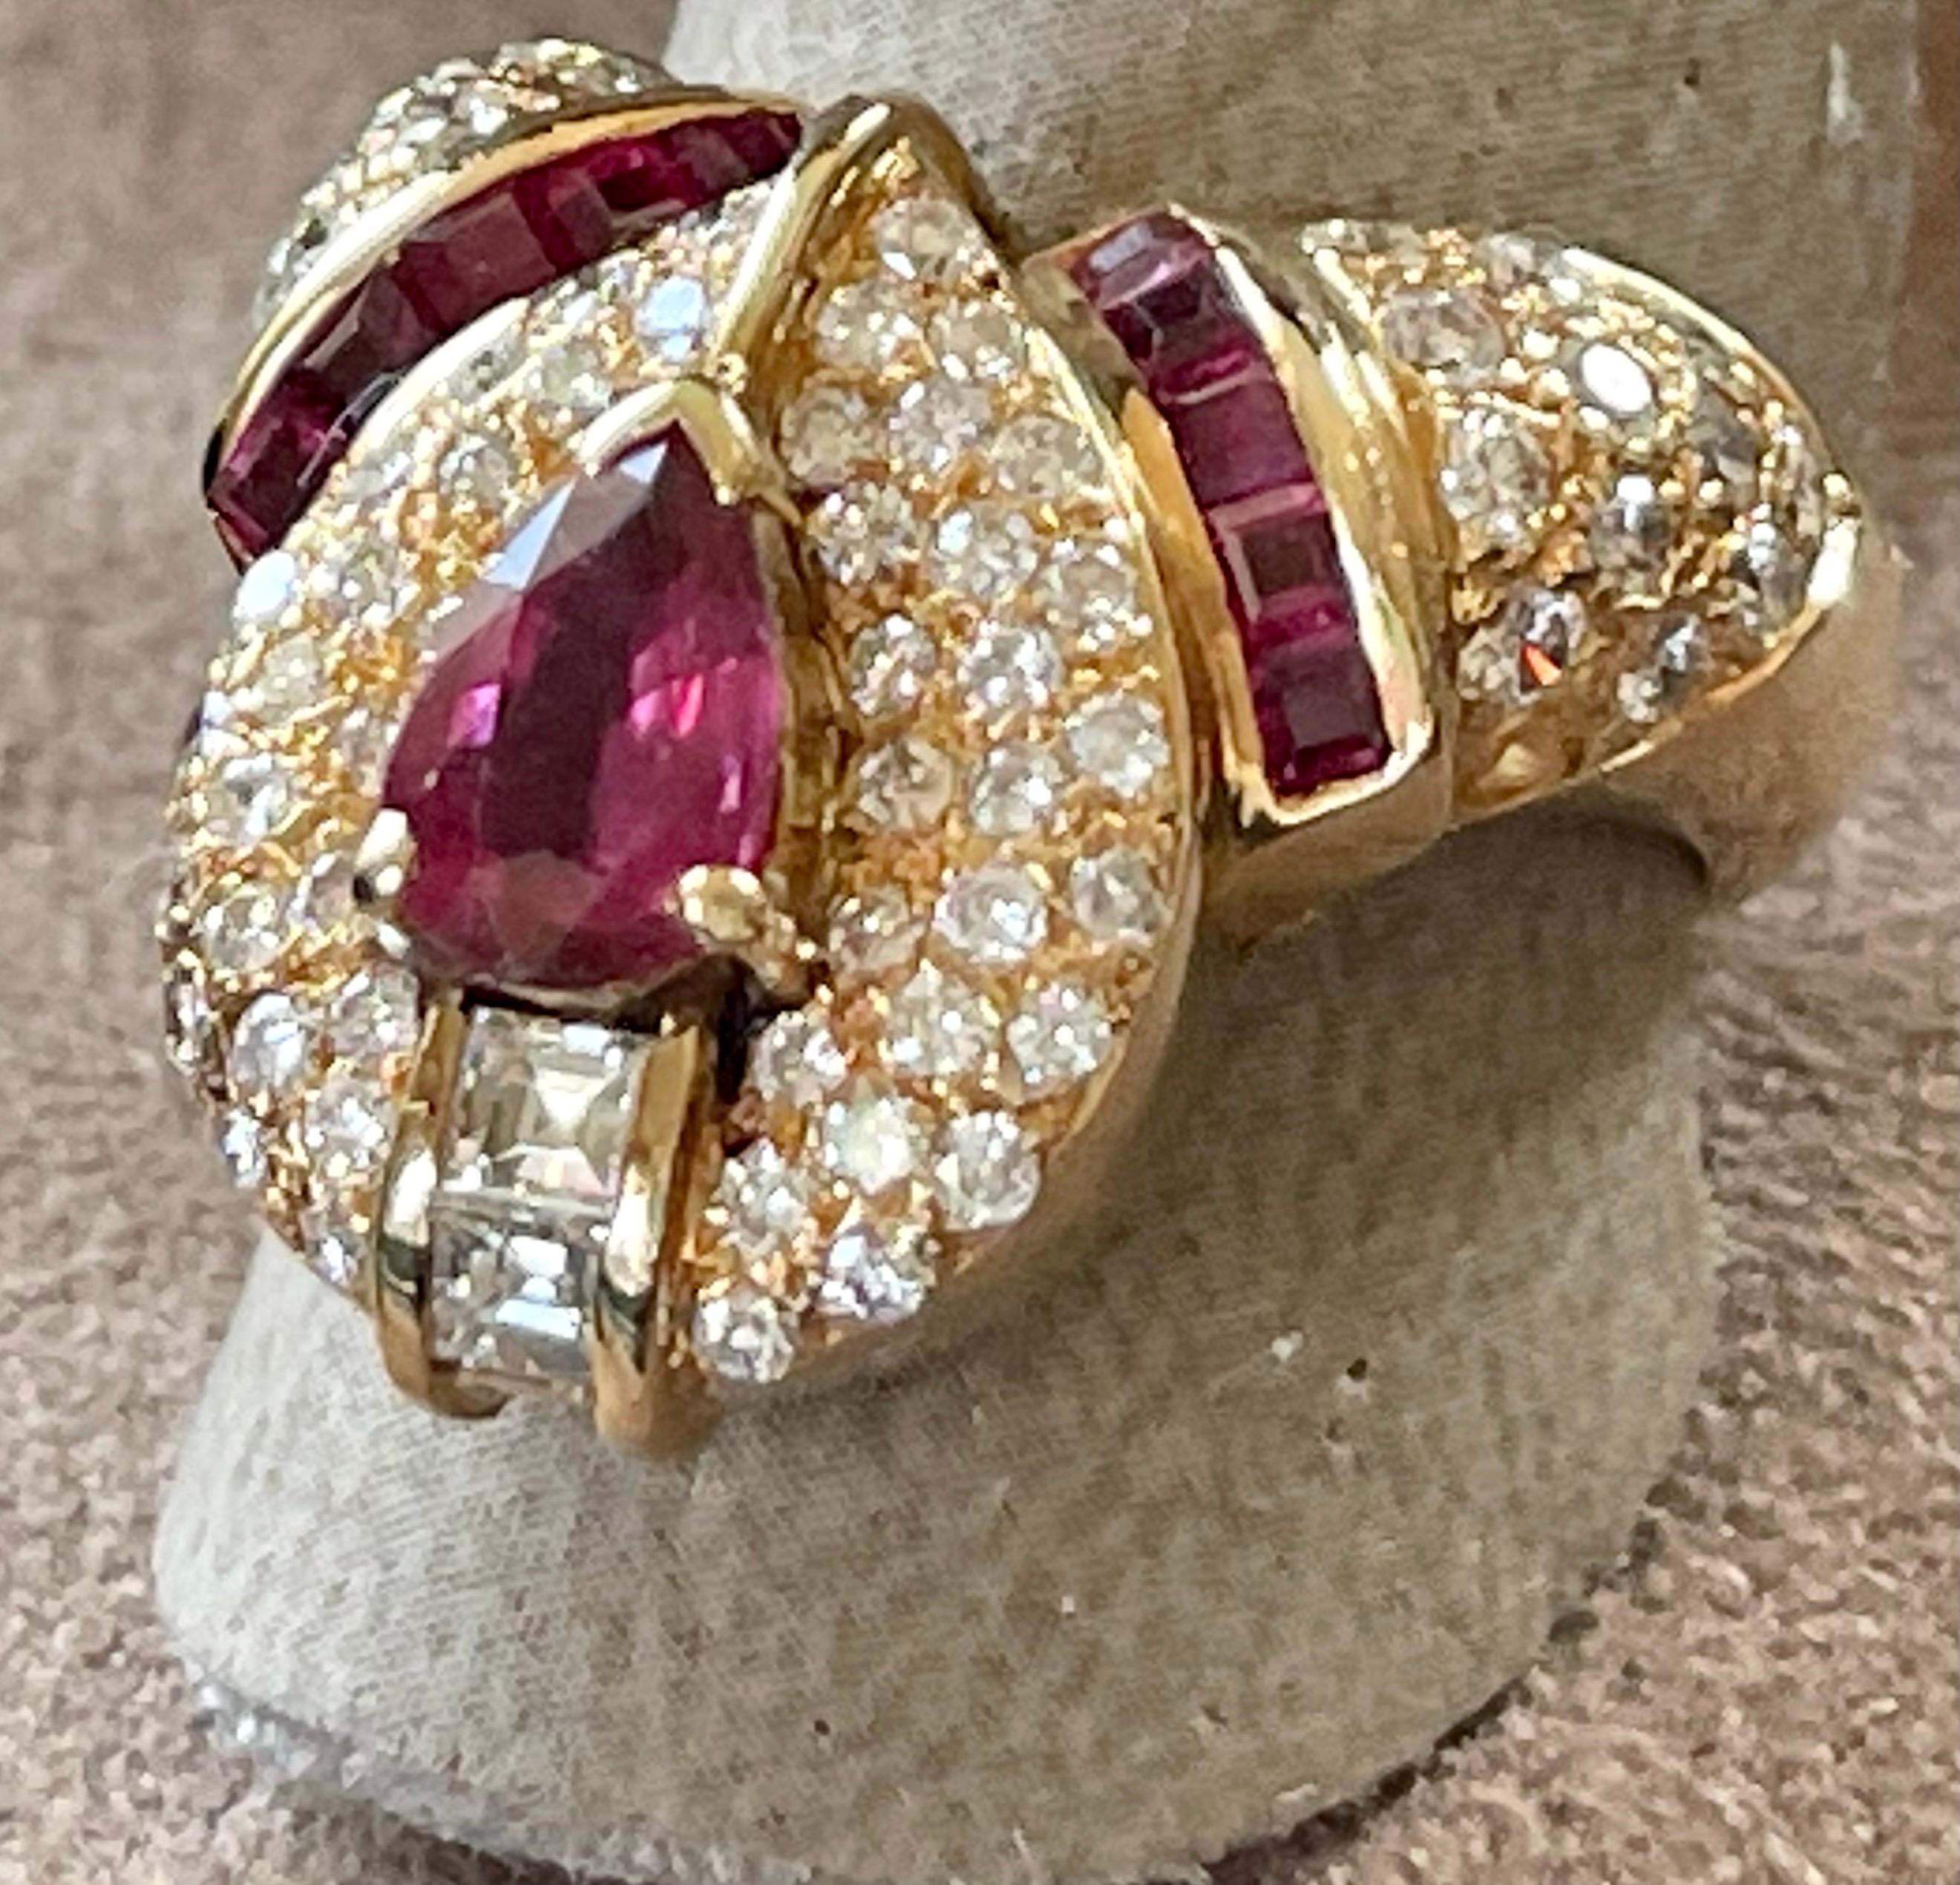 A pear shape shape ruby is the focal point of this retro ring. An oblong halo of pave set diamonds surround the center ruby, creating a elegant marquise shape. The shank is adorned by 1 row of channel set square cut Rubies and pavé set brilliant cut